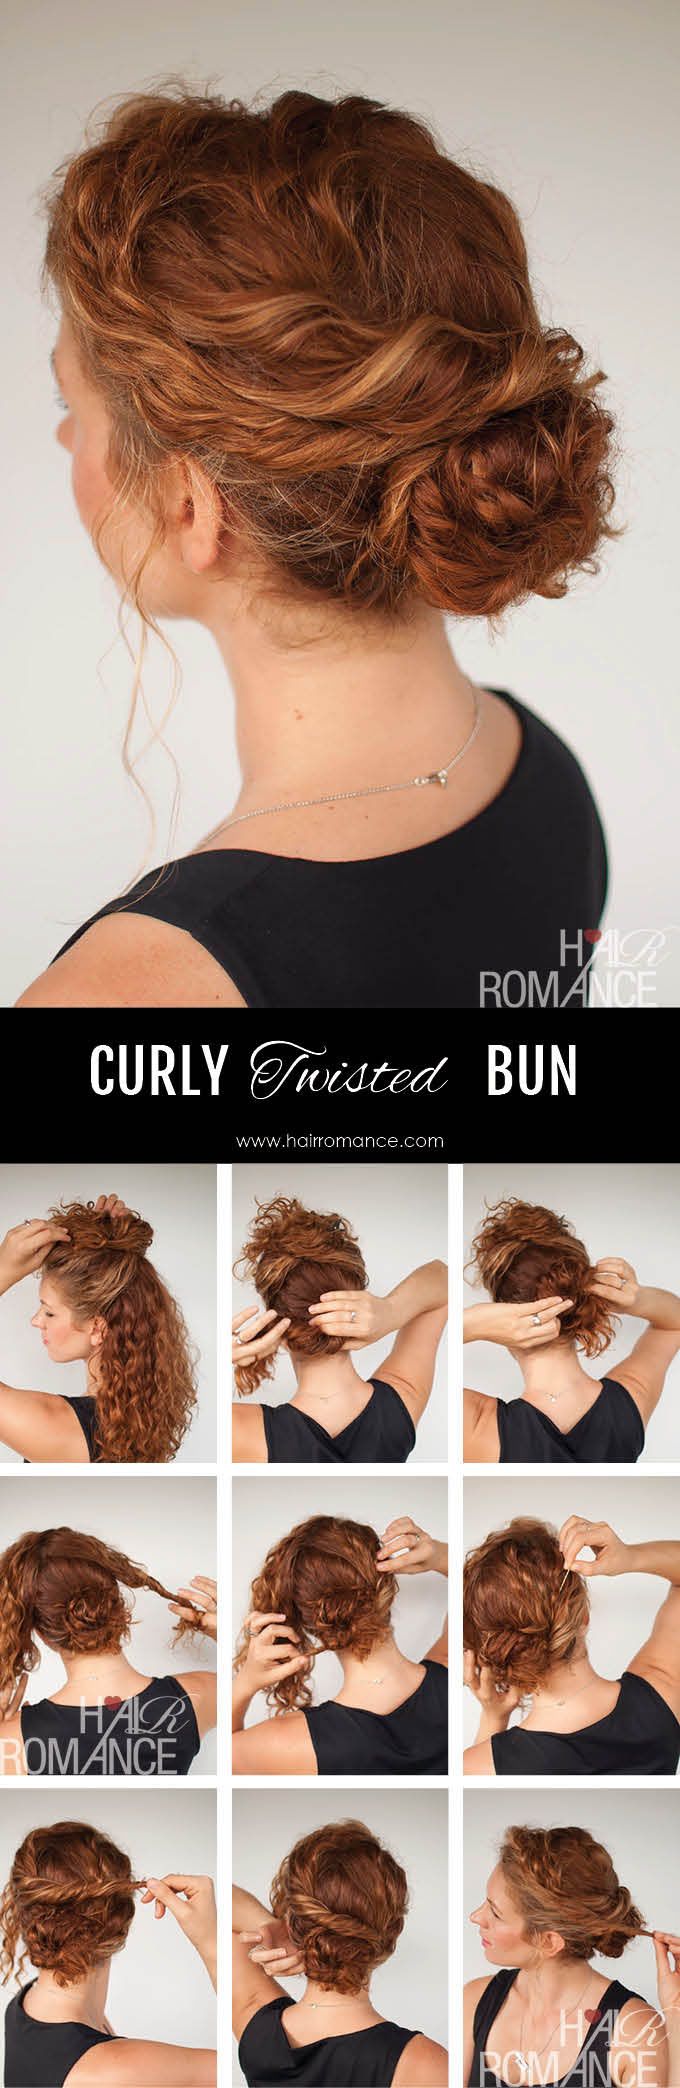 Twisted Bun Hairstyle Tutorial for Curly Hair